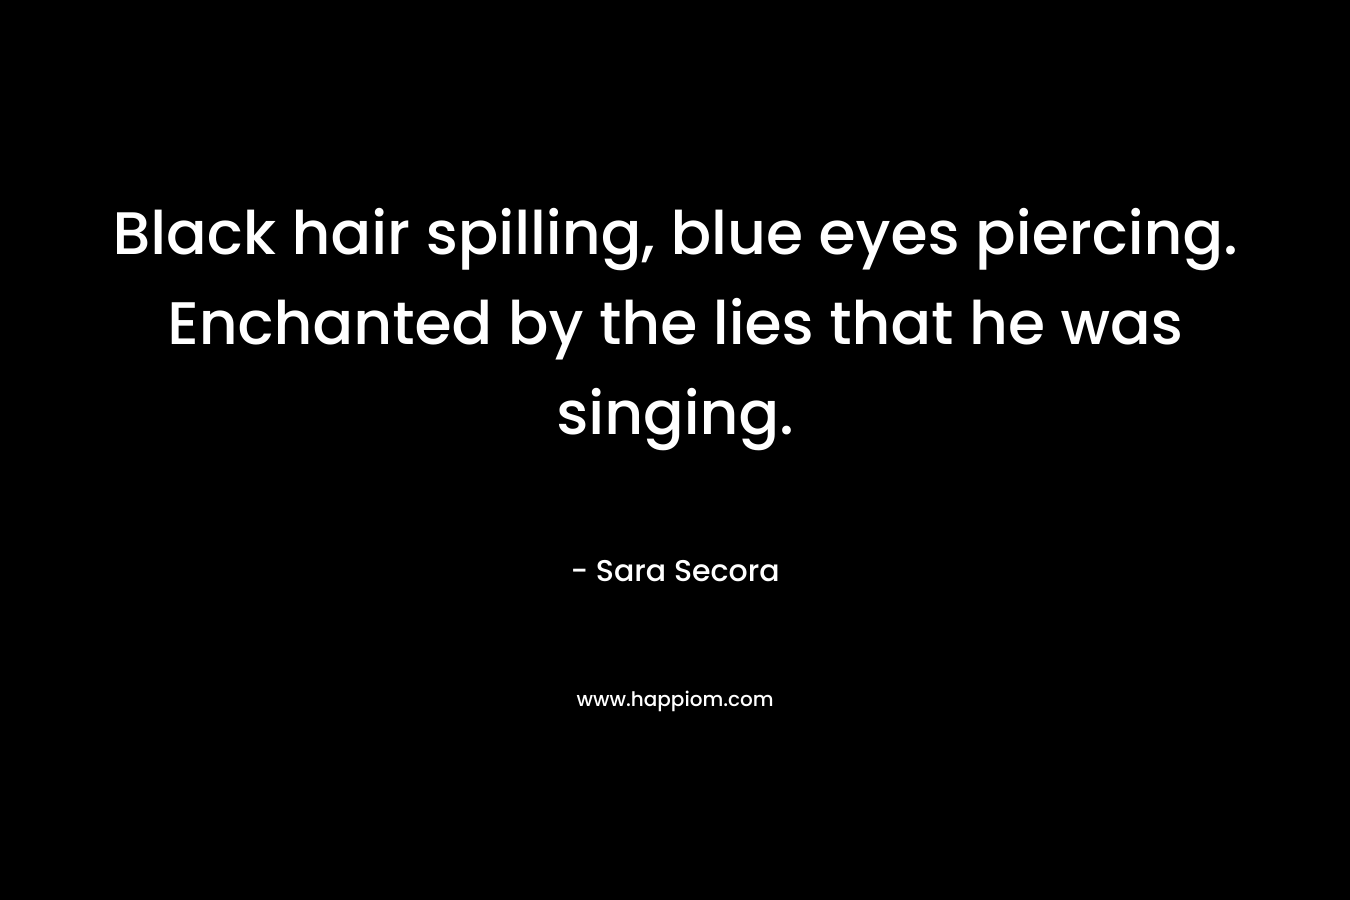 Black hair spilling, blue eyes piercing. Enchanted by the lies that he was singing. – Sara Secora